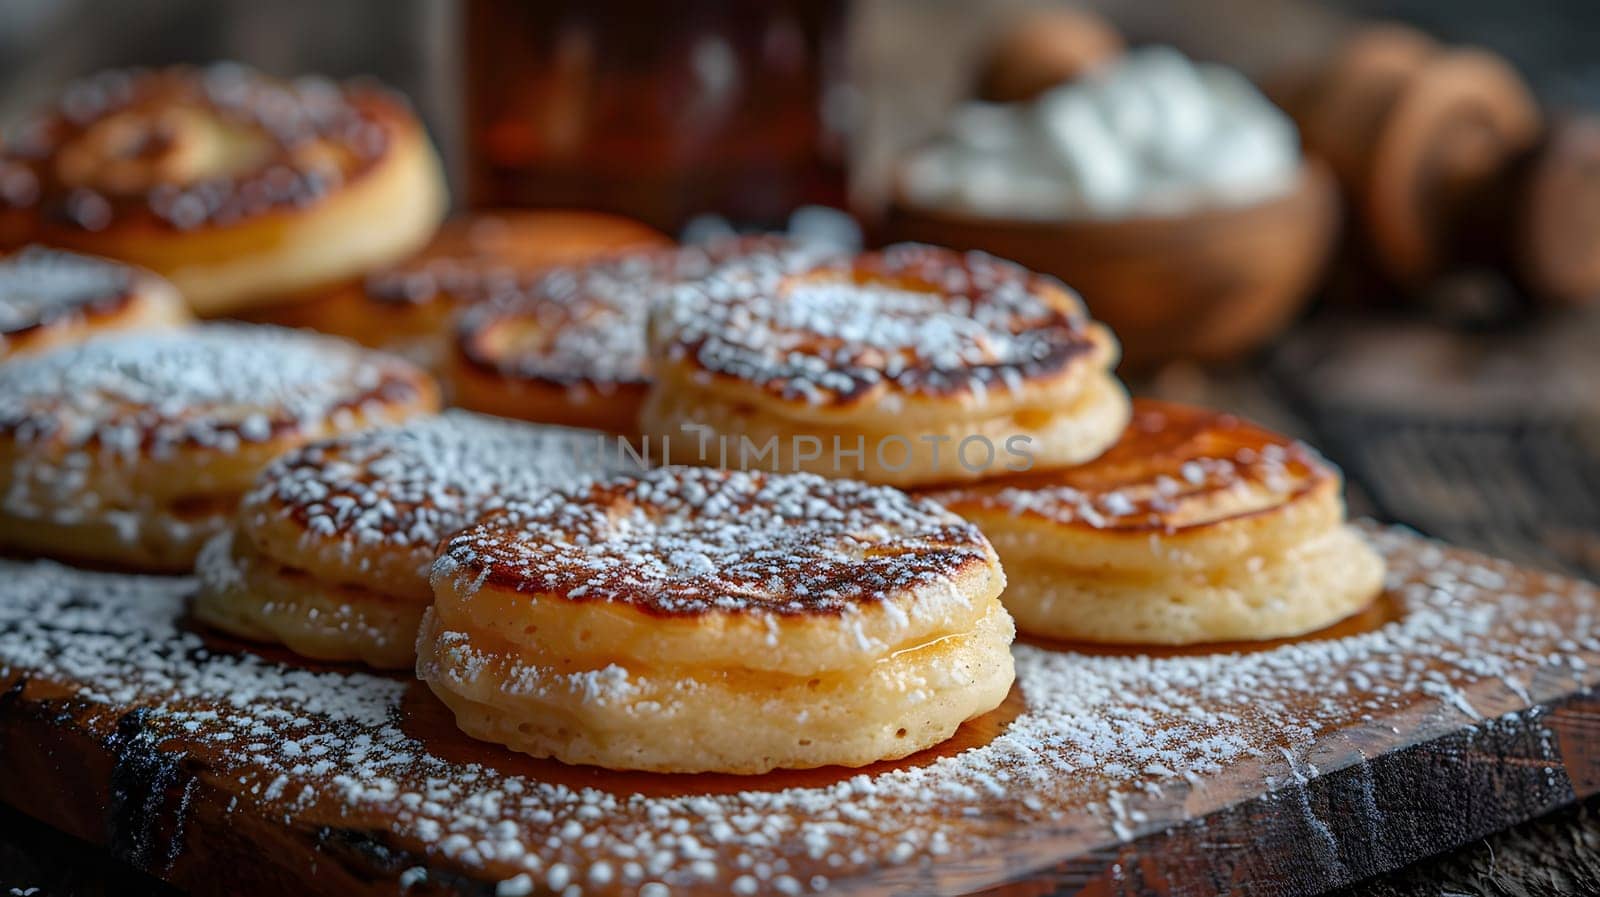 A wooden cutting board topped with pancakes covered in powdered sugar, a delicious dessert made from staple food ingredients, perfect for a fast food treat